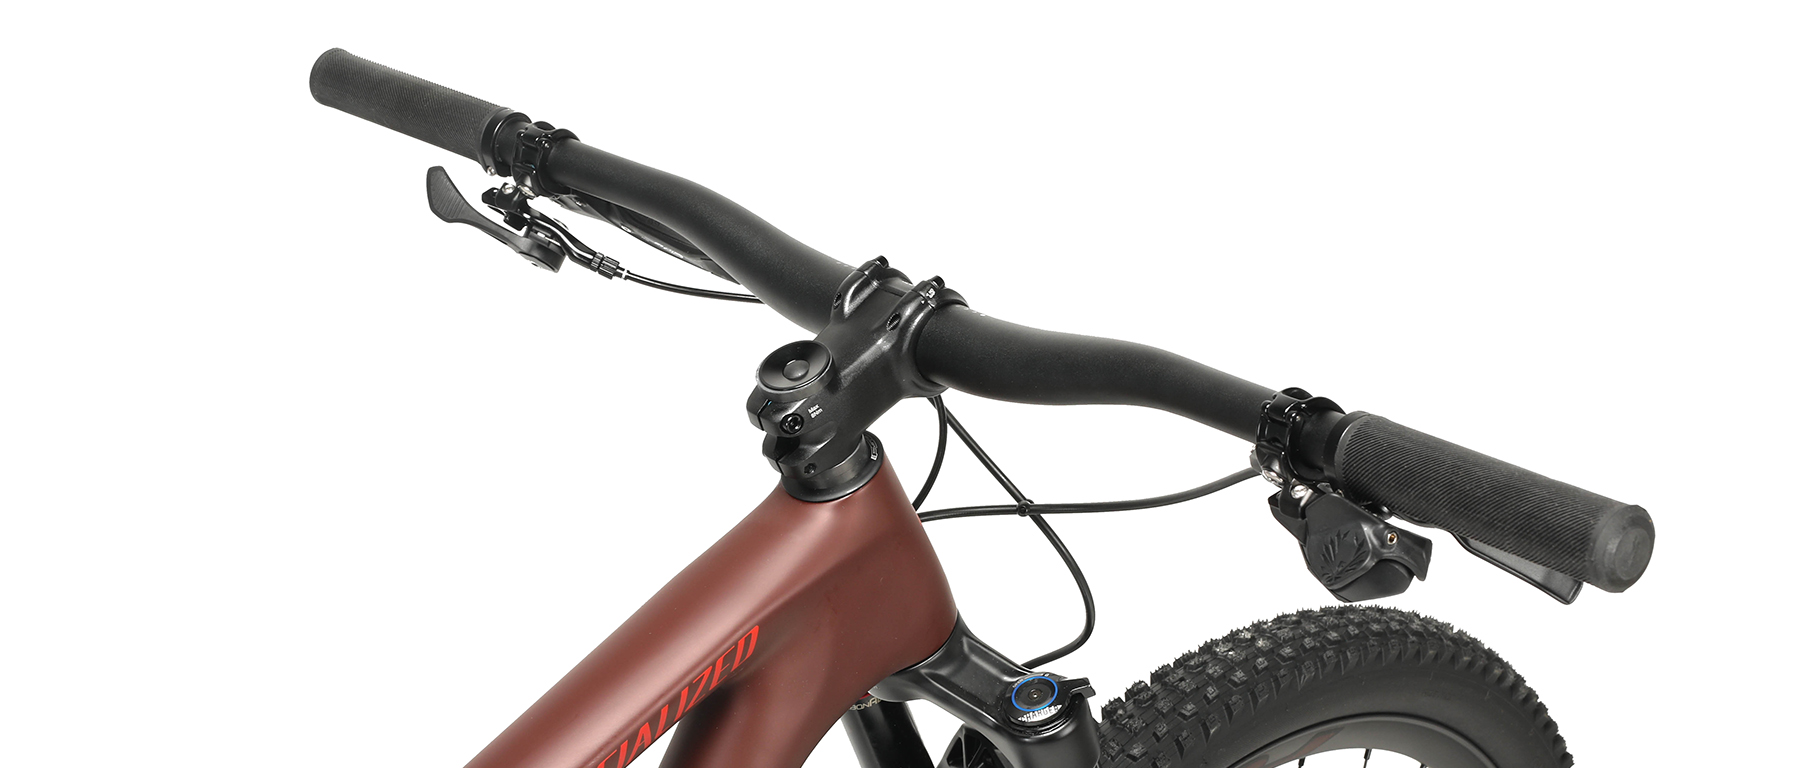 Specialized Epic EVO Expert Bicycle 2023